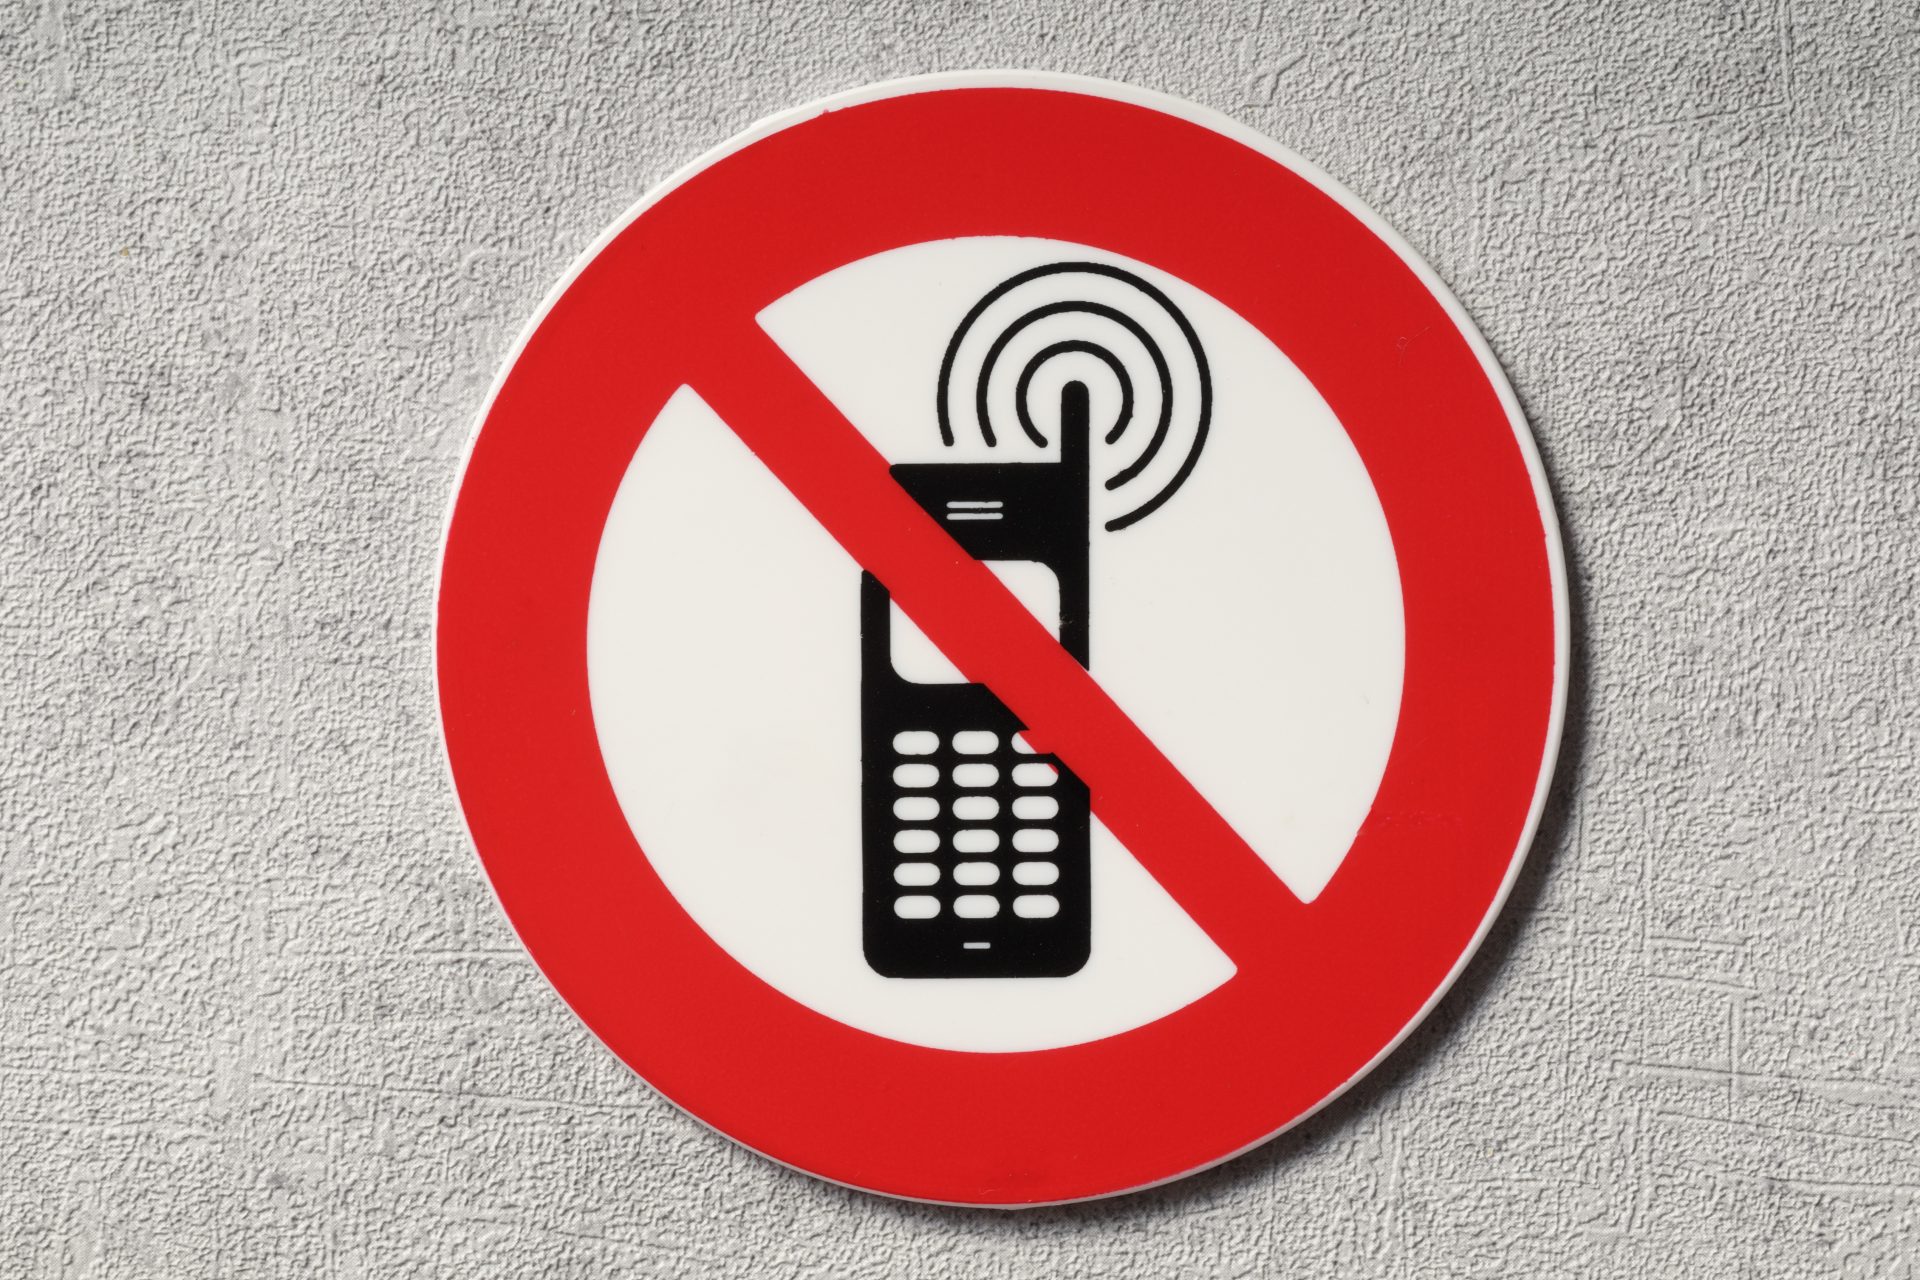 This school banned cell phones